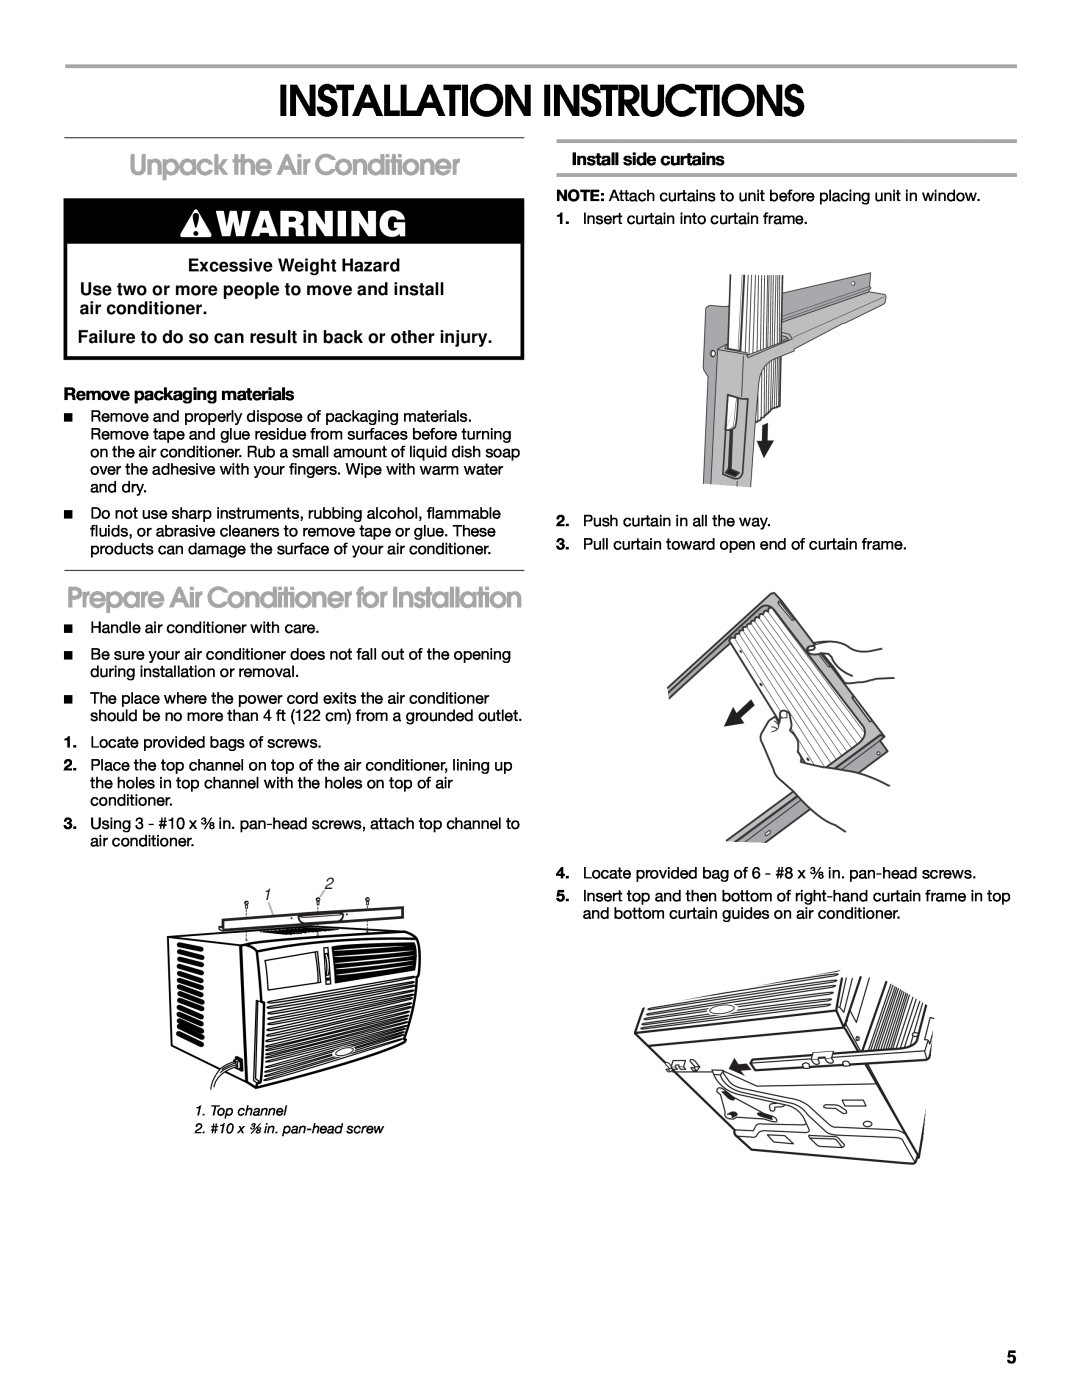 Whirlpool CA10WXP0 manual Installation Instructions, Unpack the Air Conditioner, Prepare Air Conditioner for Installation 